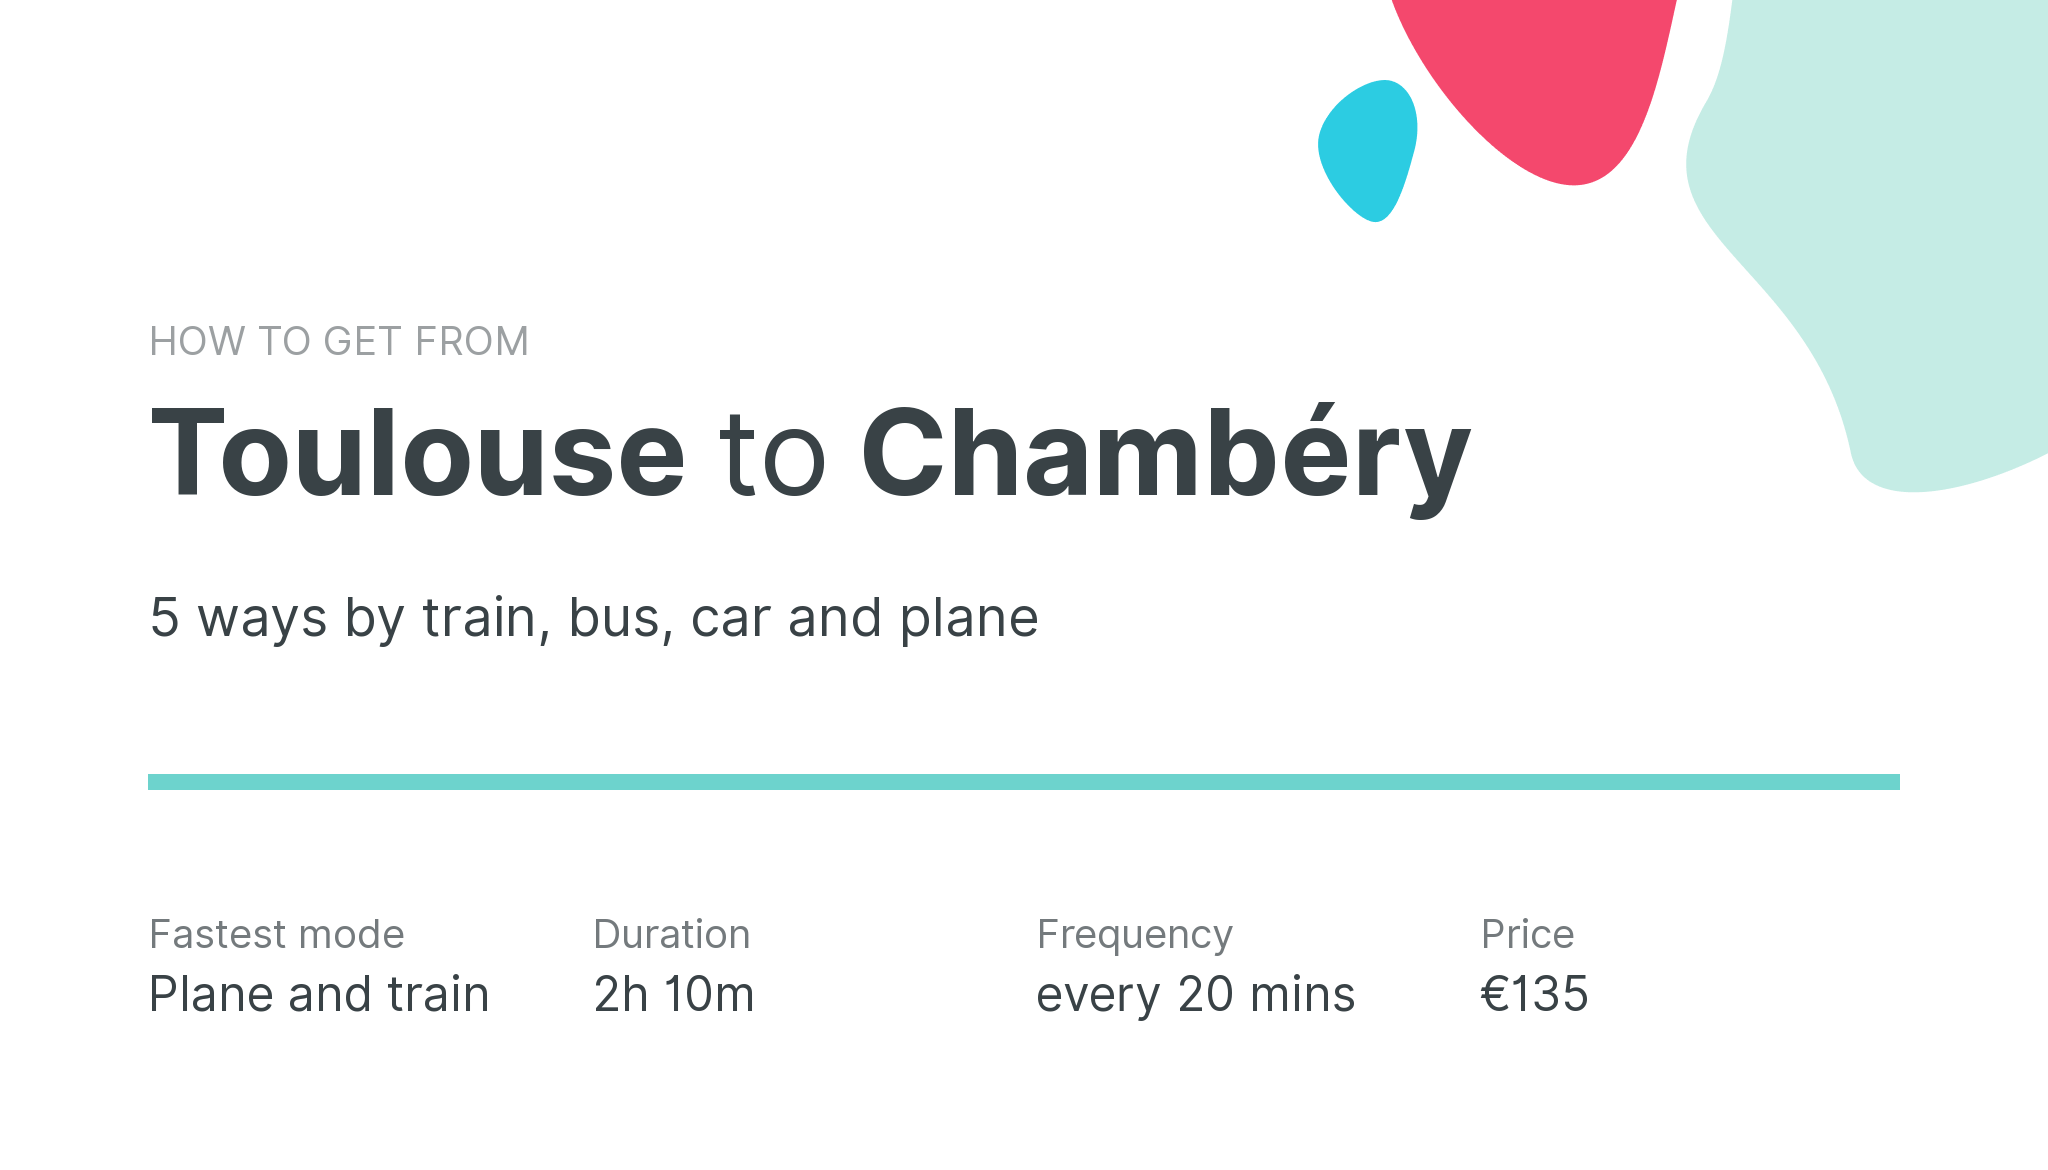 How do I get from Toulouse to Chambéry